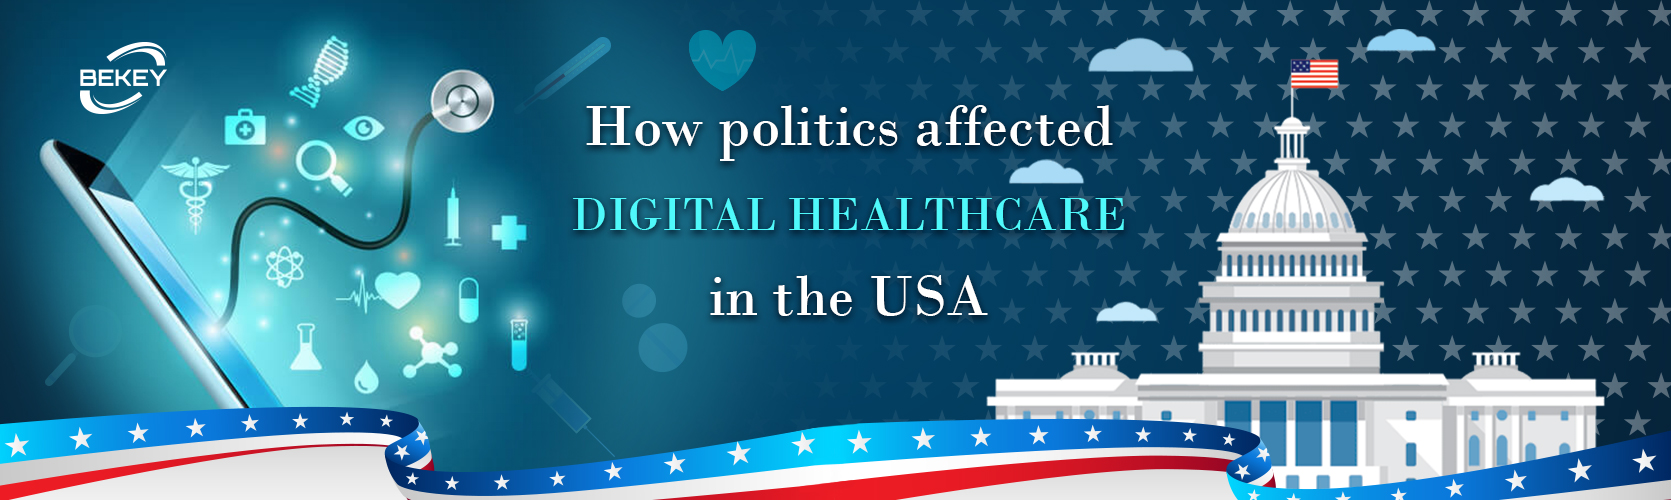 How politics affected digital healthcare in the USA